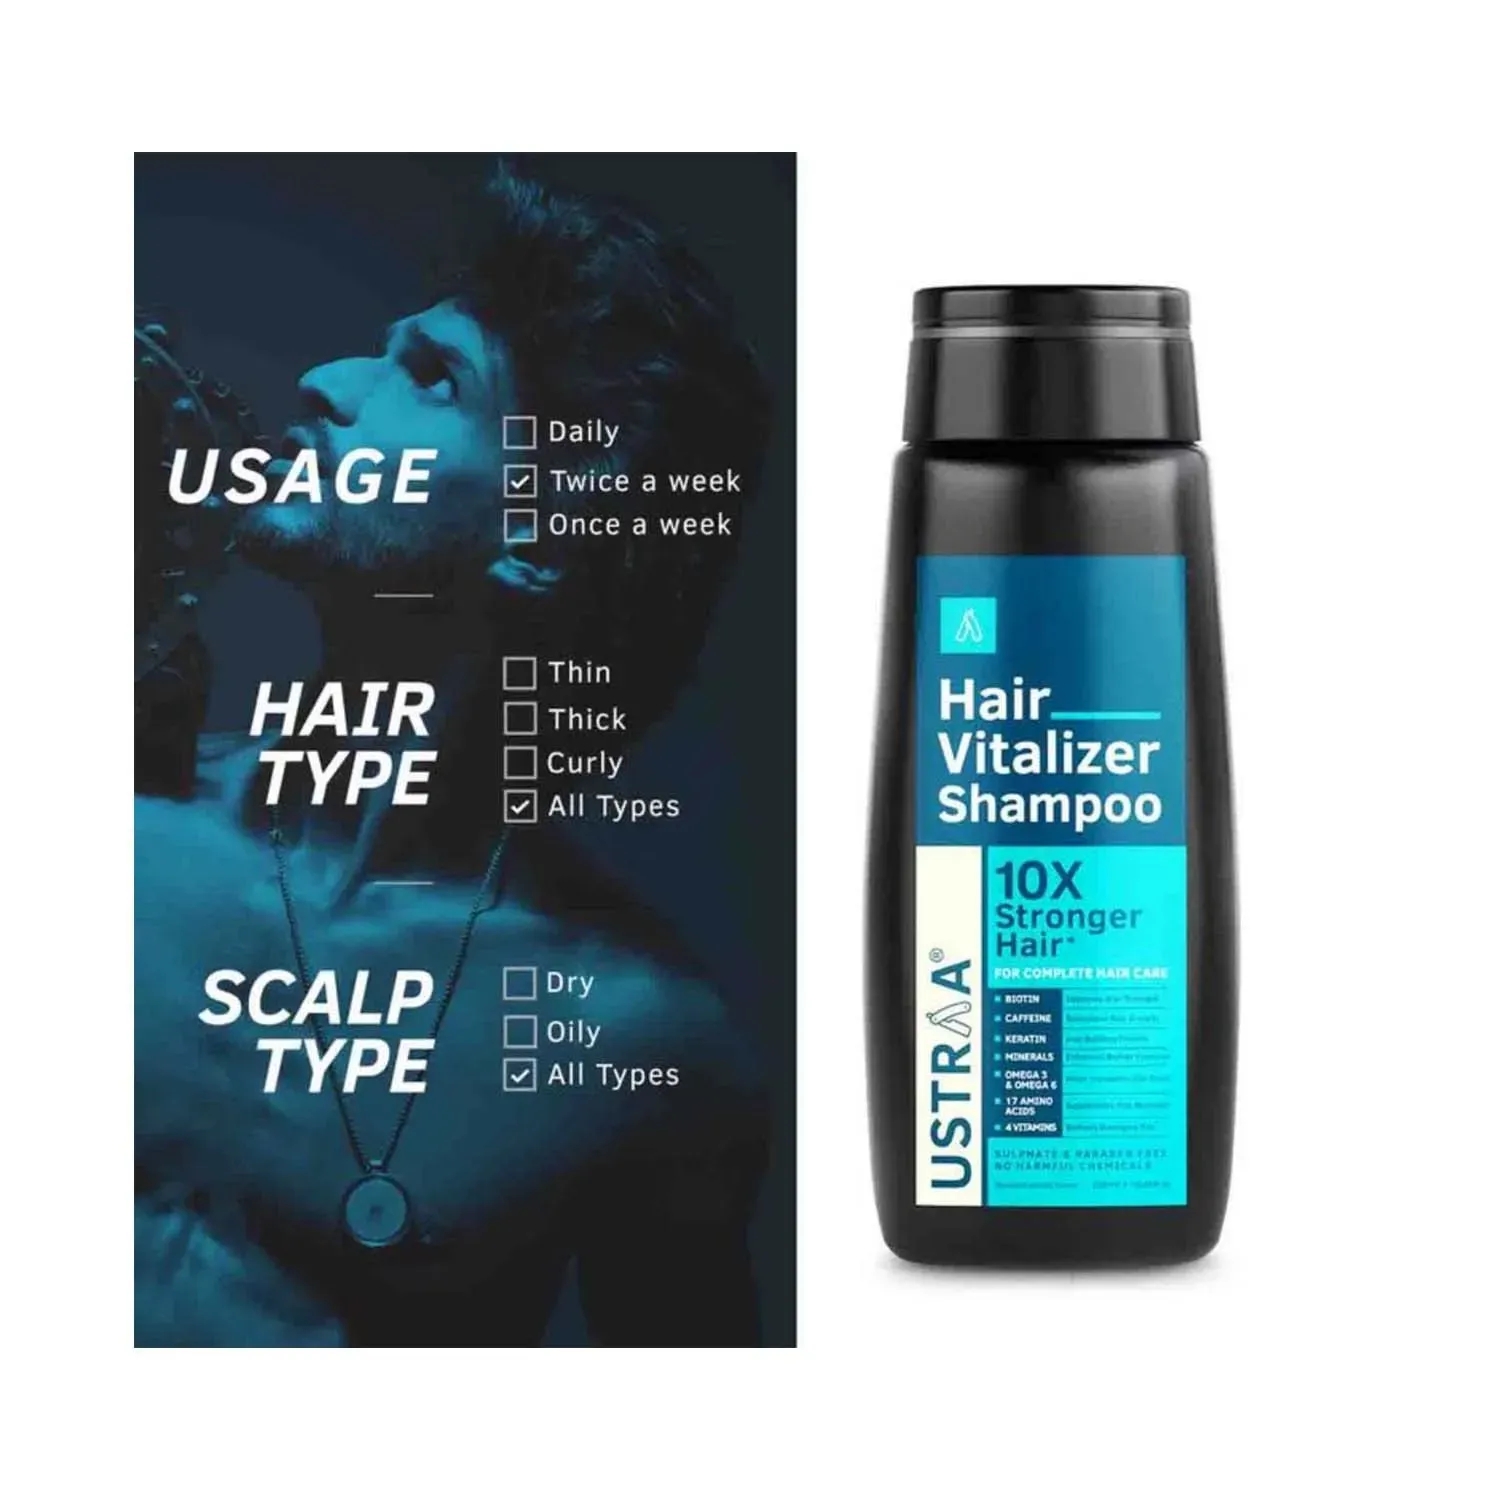 Buy USTRAA Hair Growth Vitalizer 100 Ml Online at Best Prices in India   JioMart